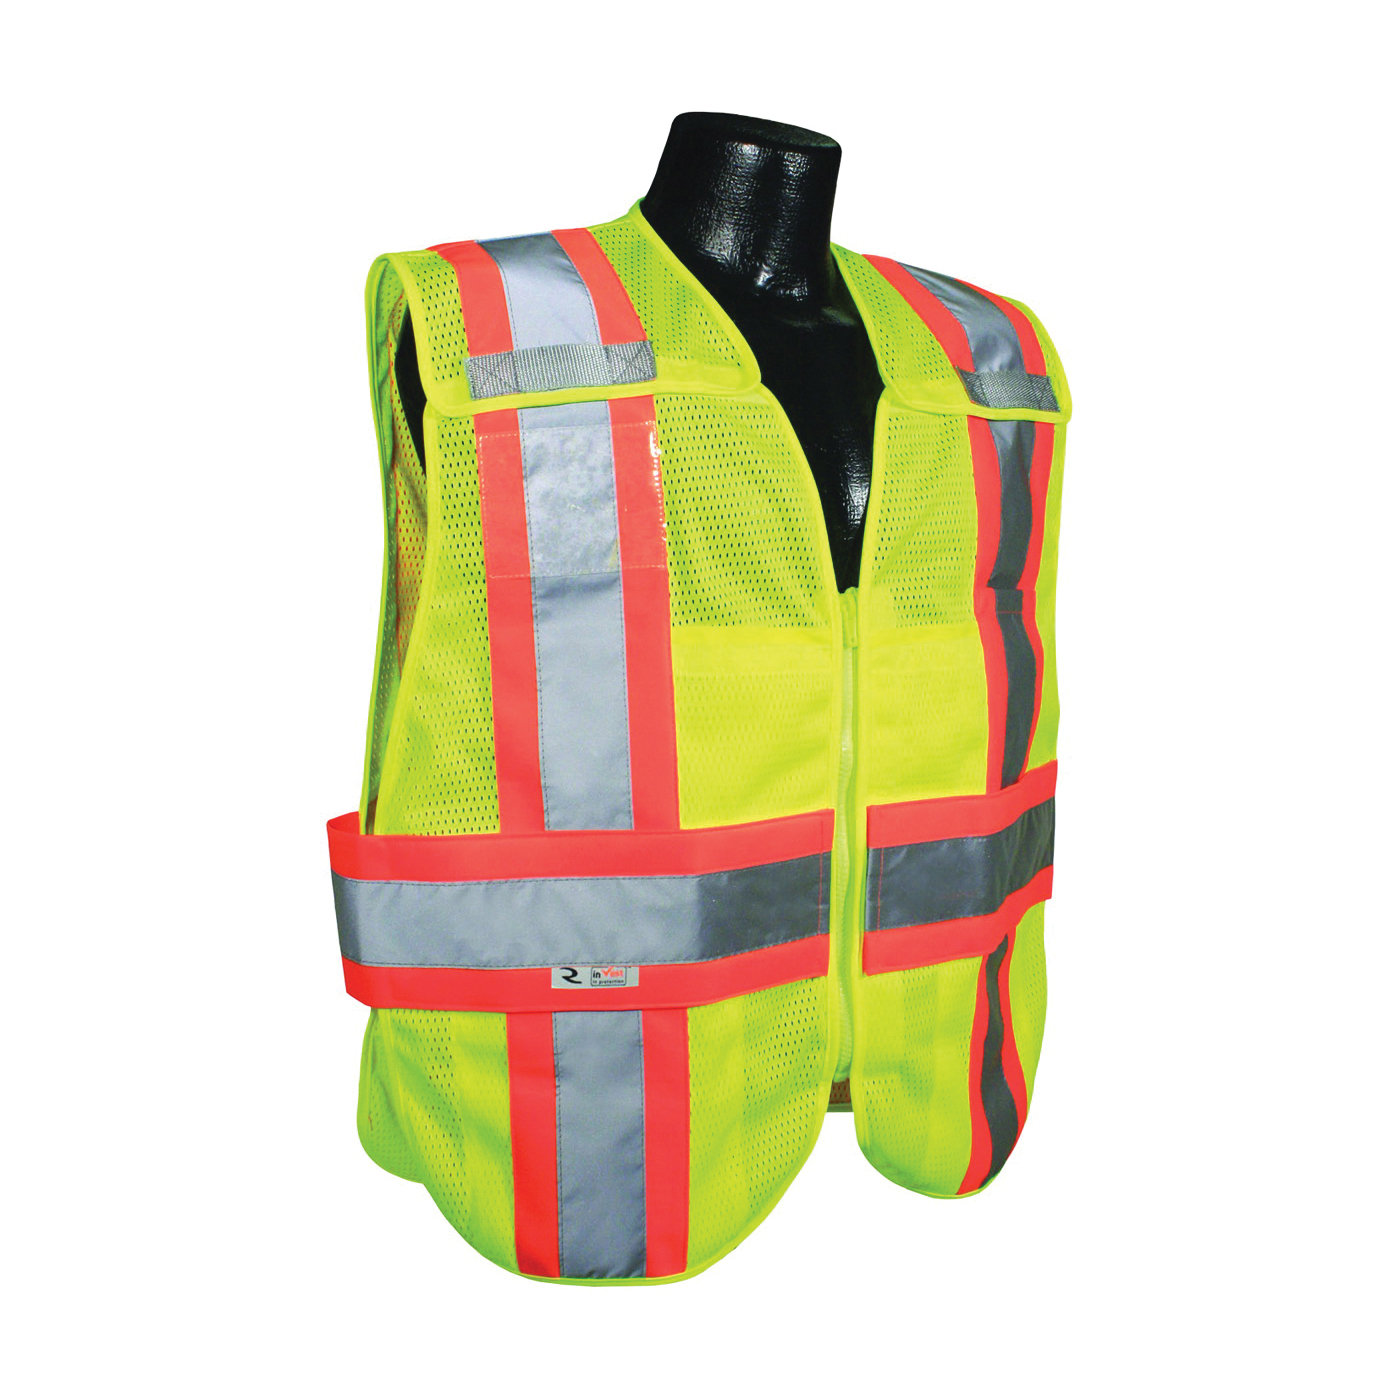 SV24-2ZGM-3X/5X Expandable Safety Vest, 3XL/5XL, Polyester, Green/Silver, Zip-N-Rip Closure